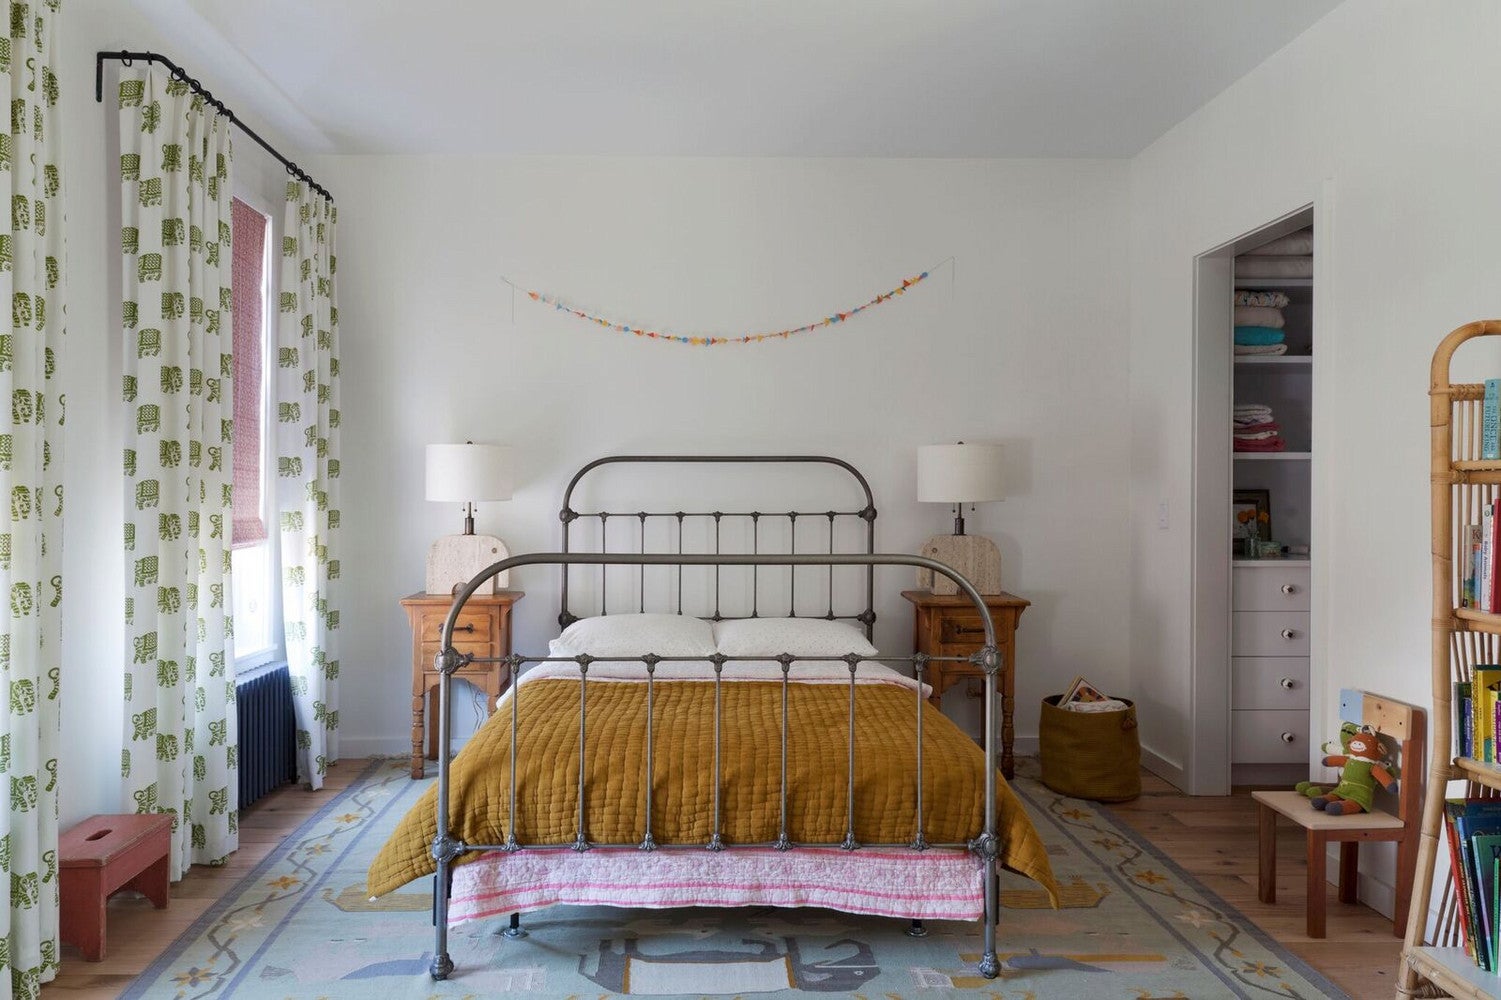 The Most Beautiful Bedrooms 2017 Had to Offer